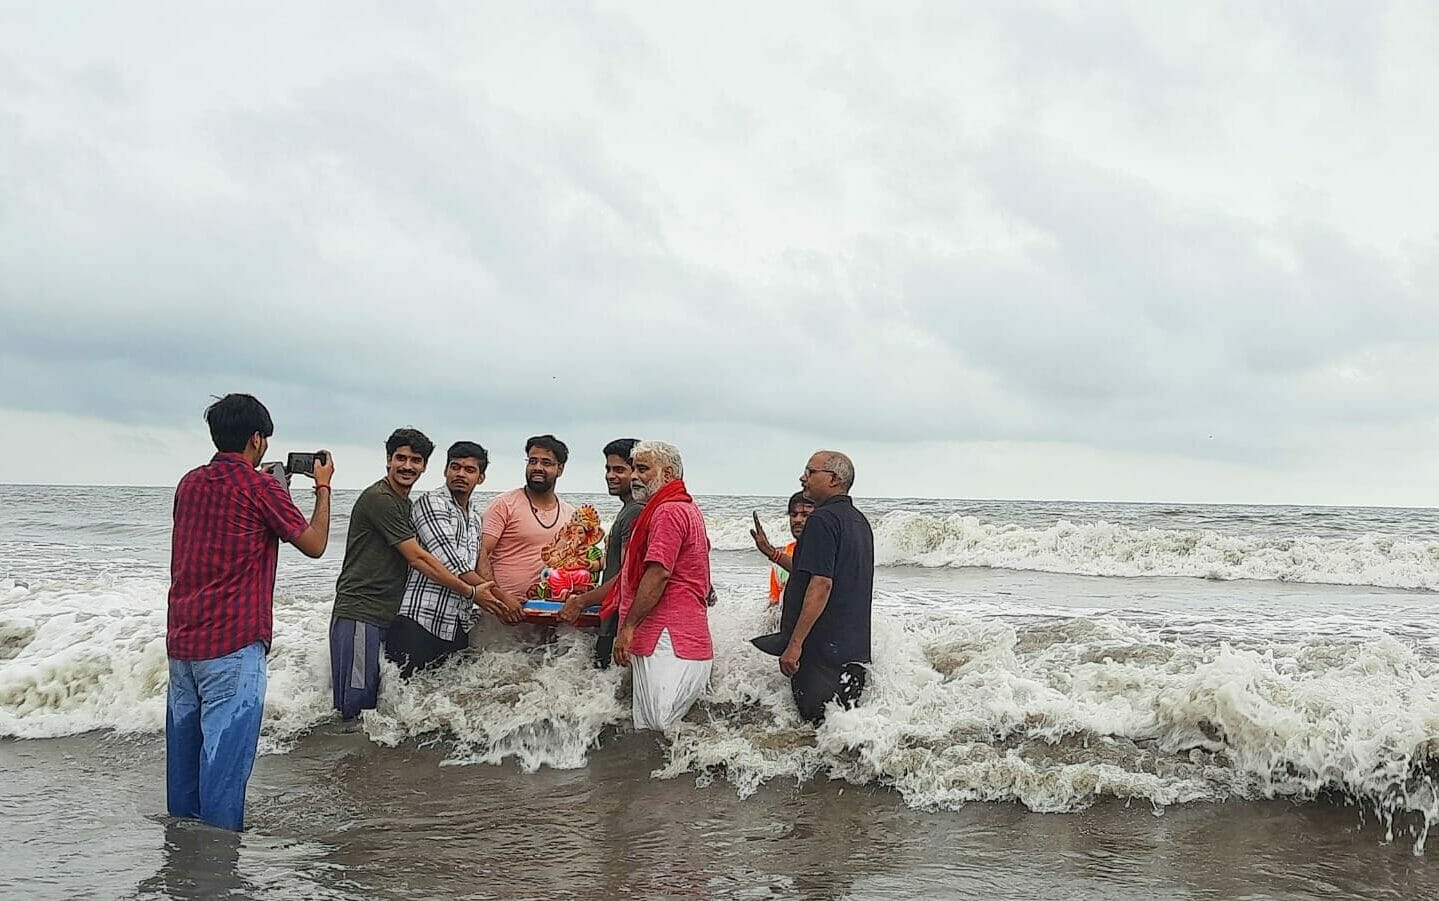 The last selfie before dipping the Idol in water. That's how many people capture memories with Bappa. Pic: Stephin Thomas